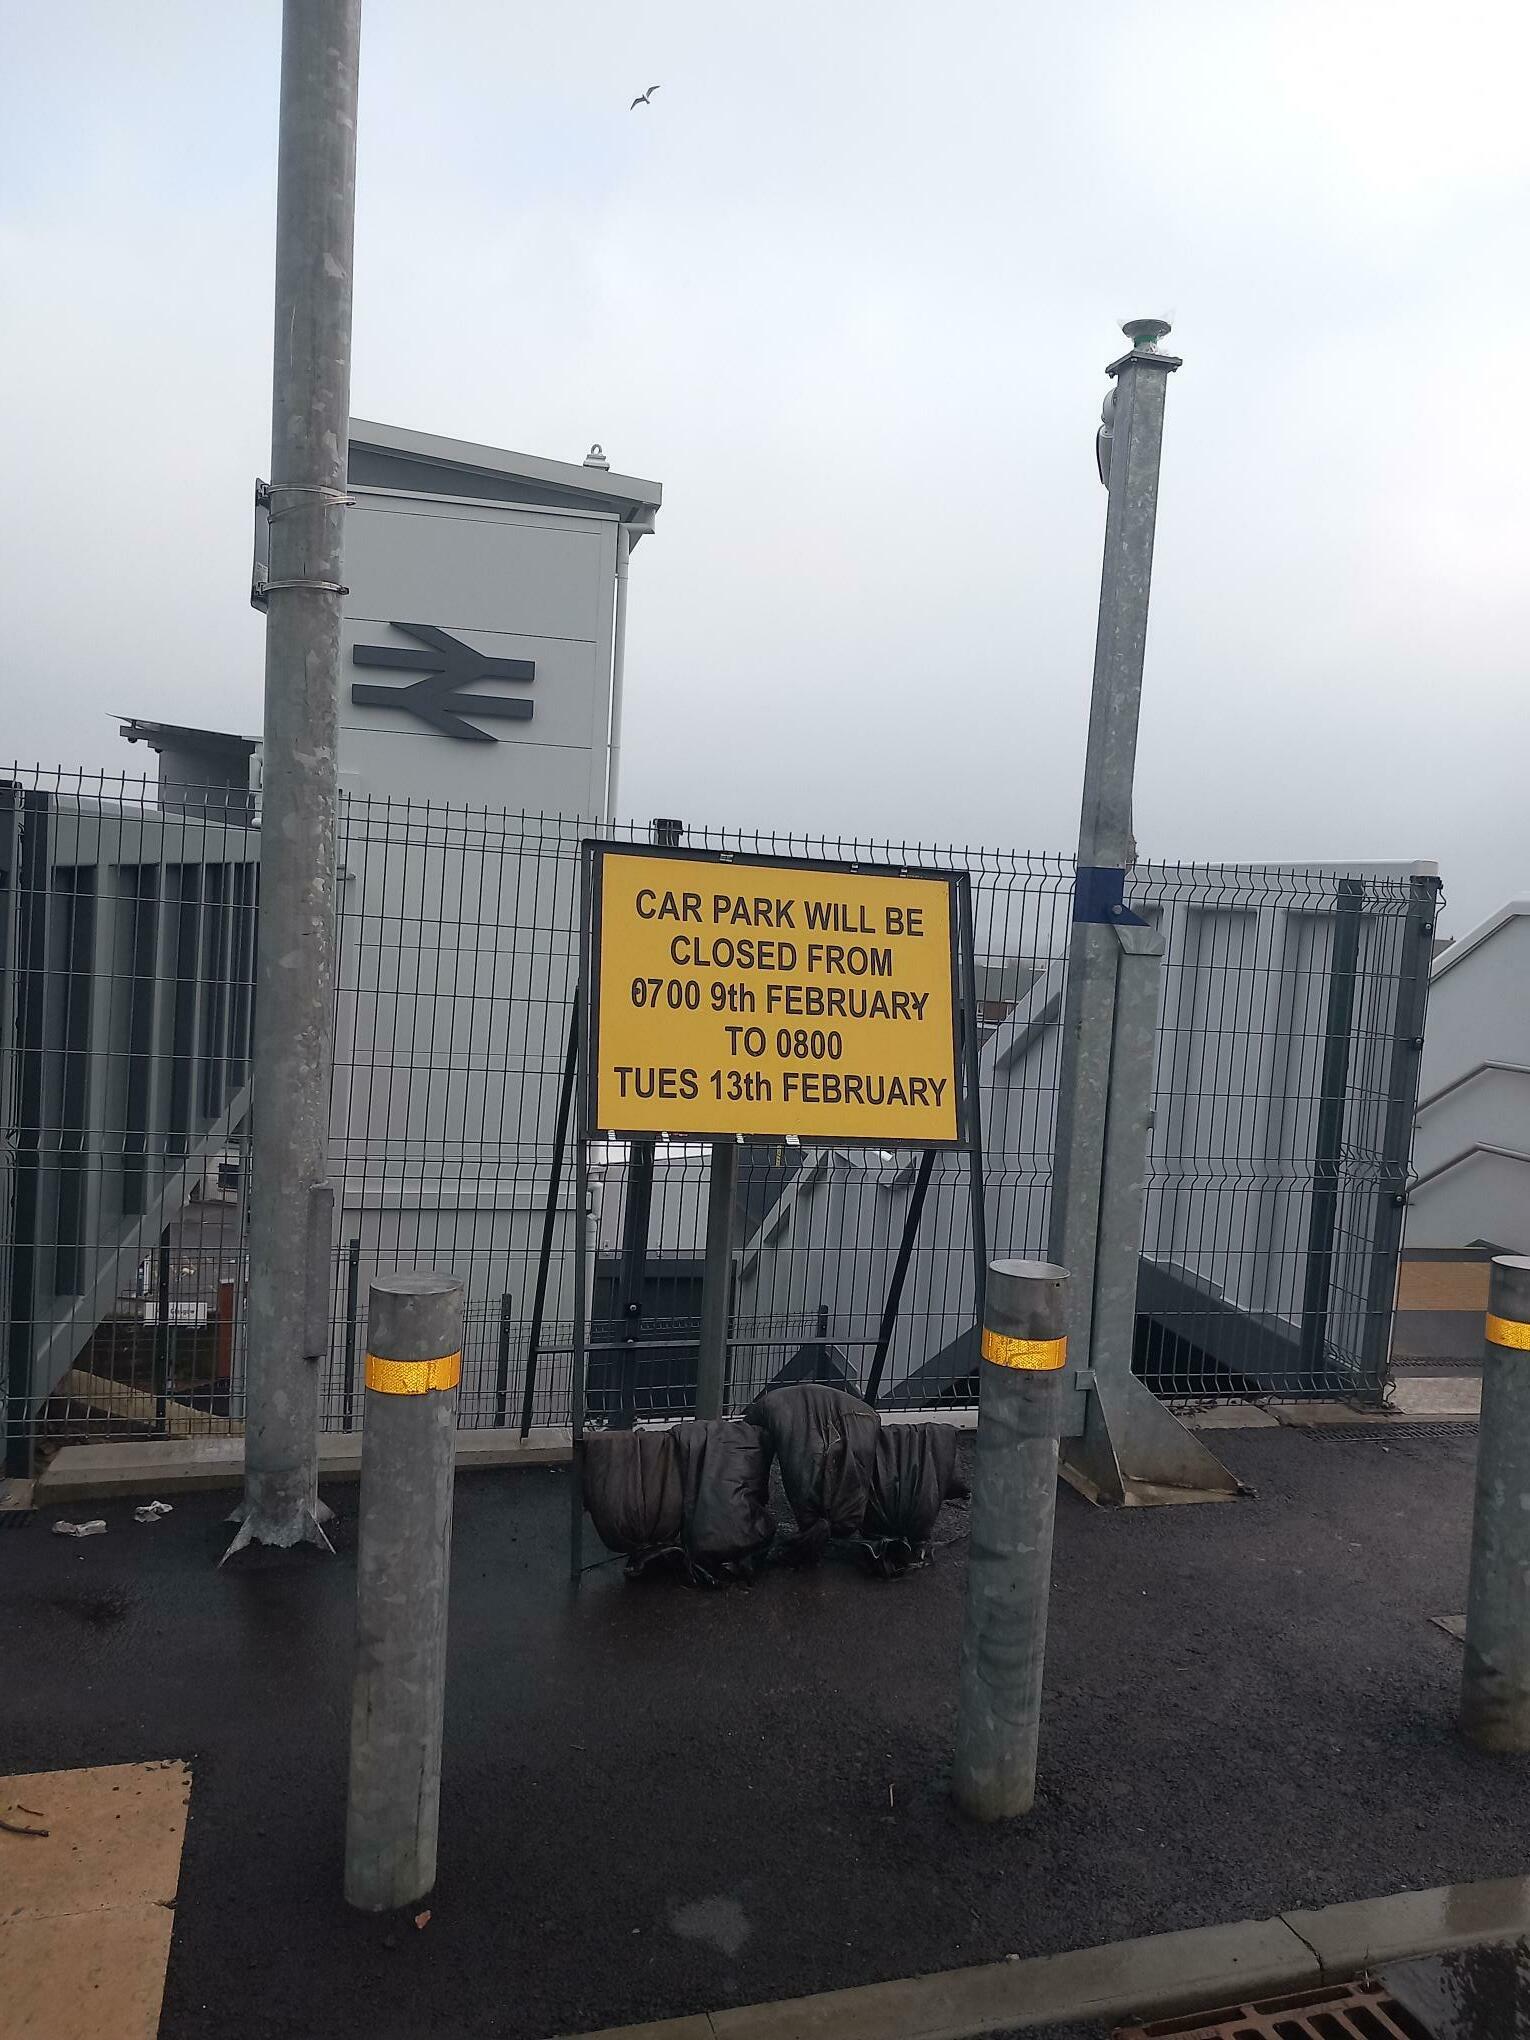 Port Glasgow station and car park closed in Feb for bridge removal